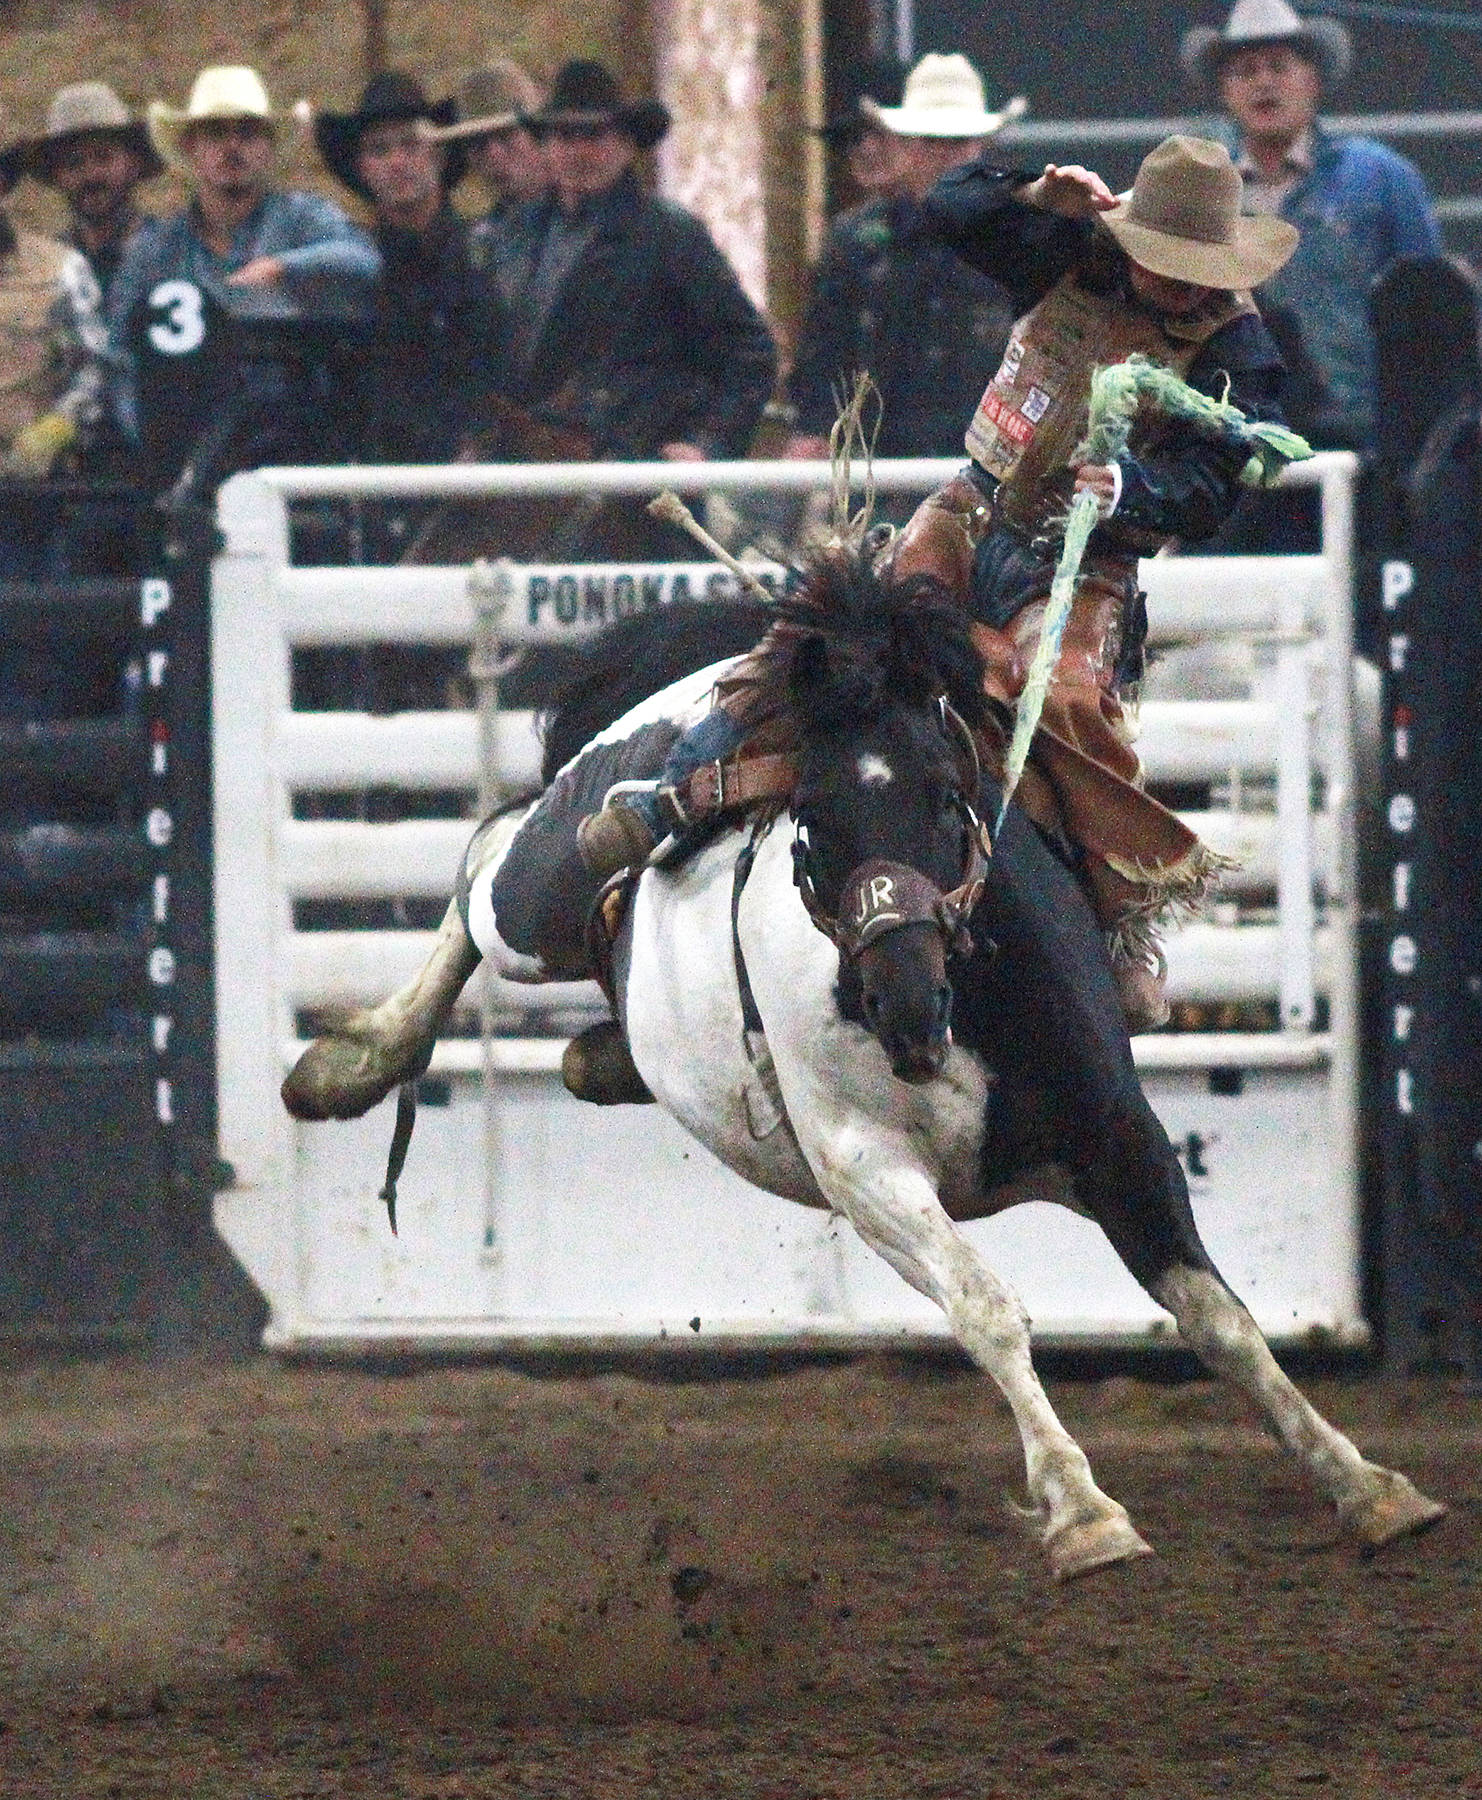 Saddle bronc rider Jake Watson rides Chief Sept. 19 right after the celebration of life of rodeo legend Winston Bruce. The invitational brought some of the best saddle bronc riders around.